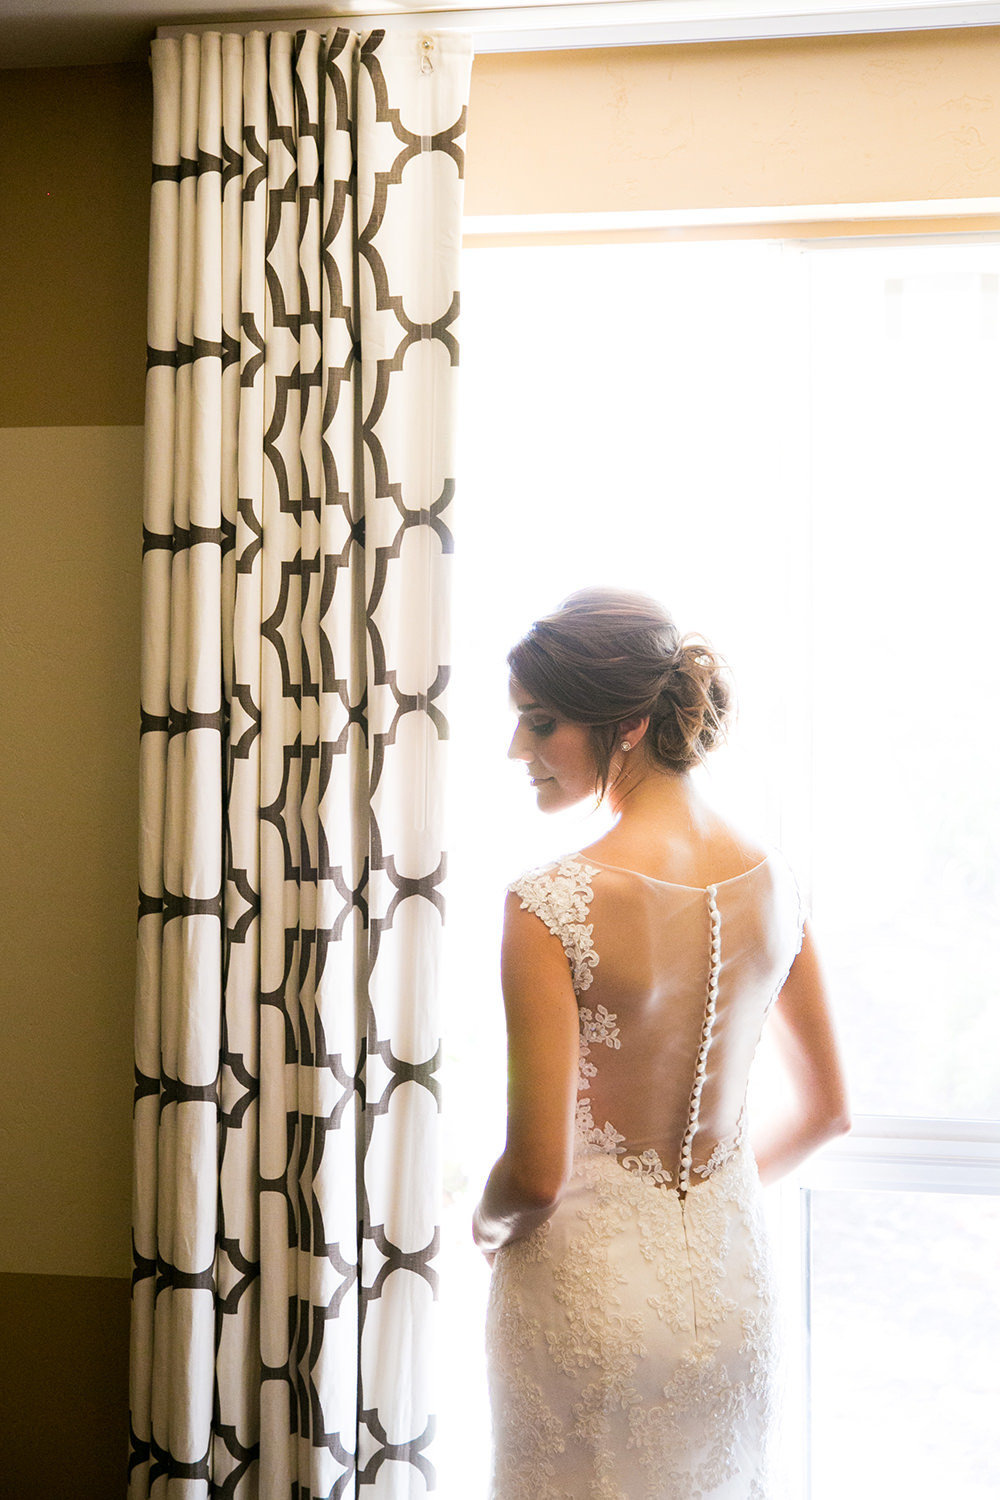 stunning bride image at carlton oaks country club getting ready